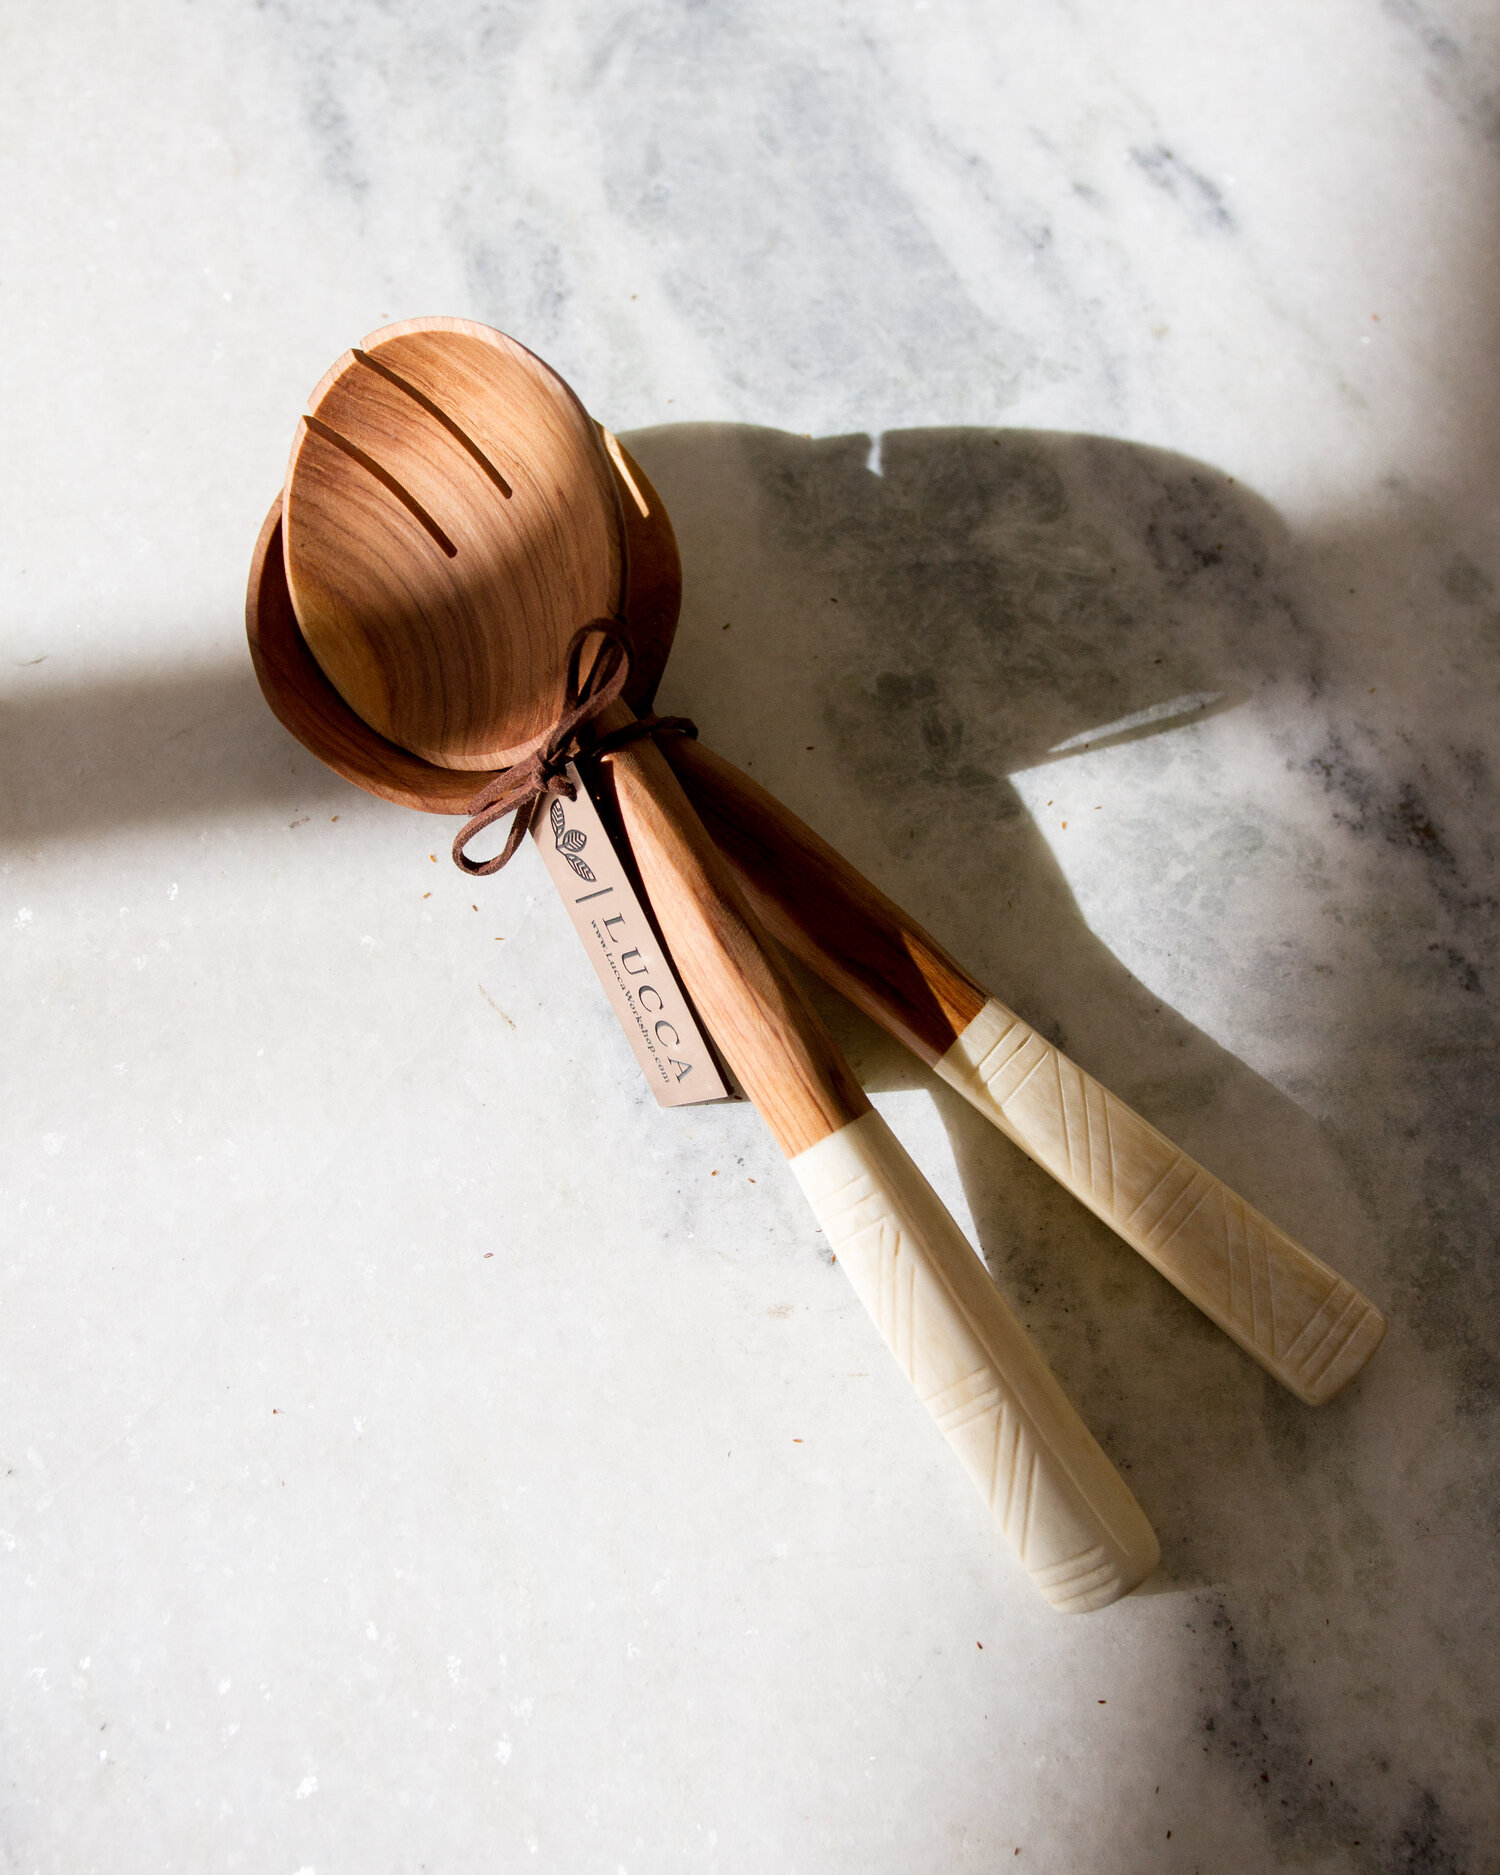 Shop Olive Wood + Bone Serving Utensils from Lucca on Openhaus